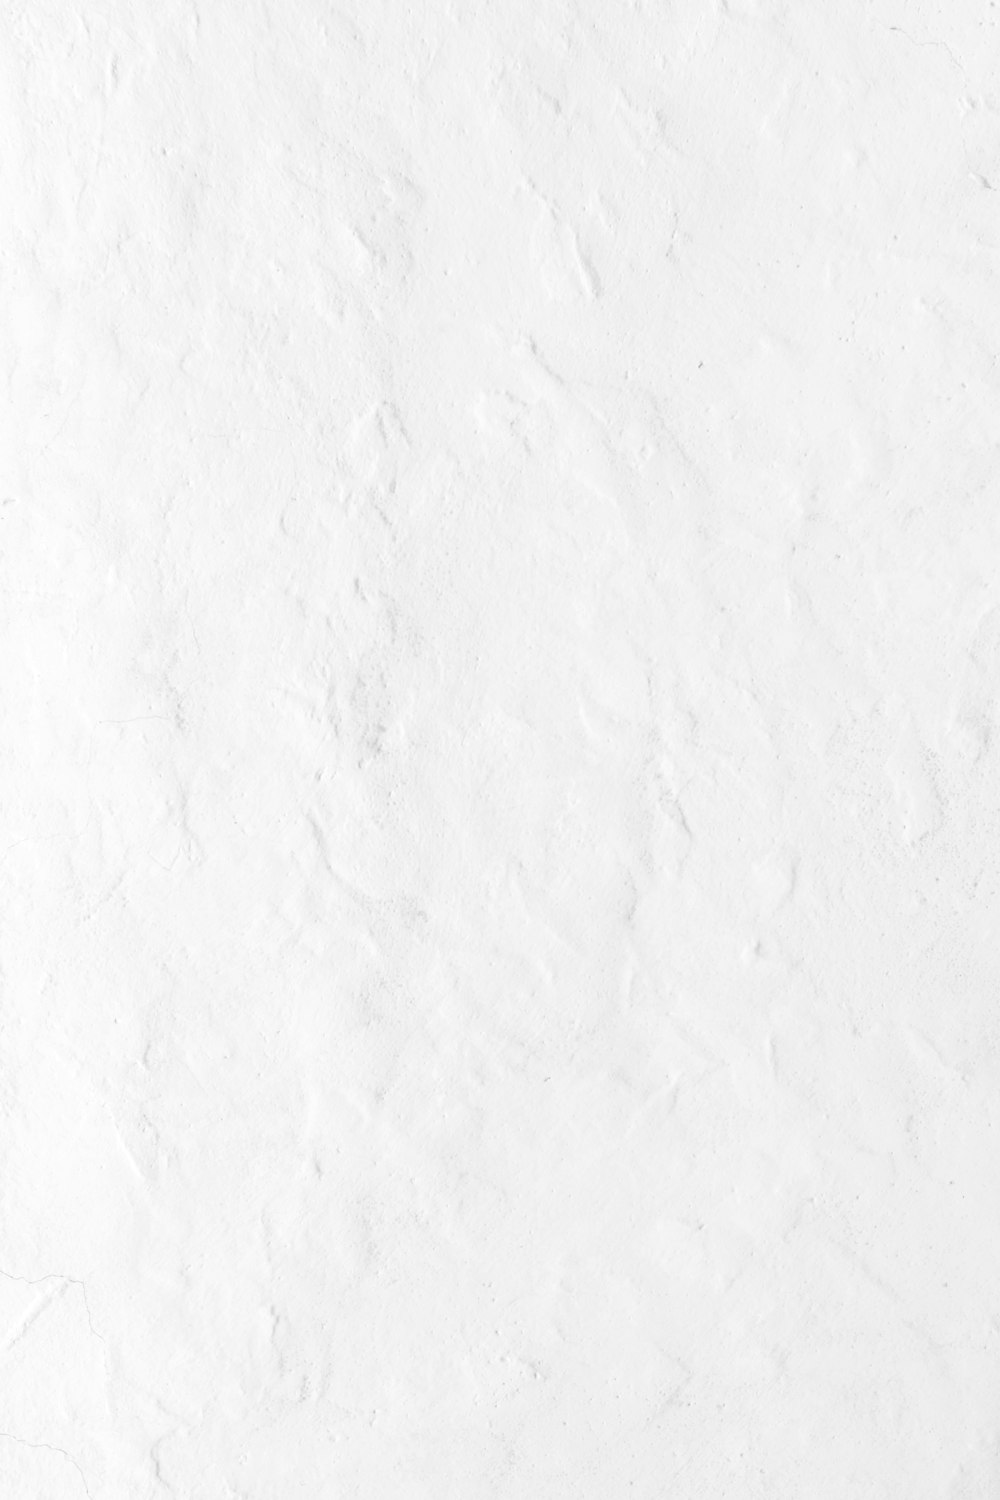 White Paper Texture Free Photo Download